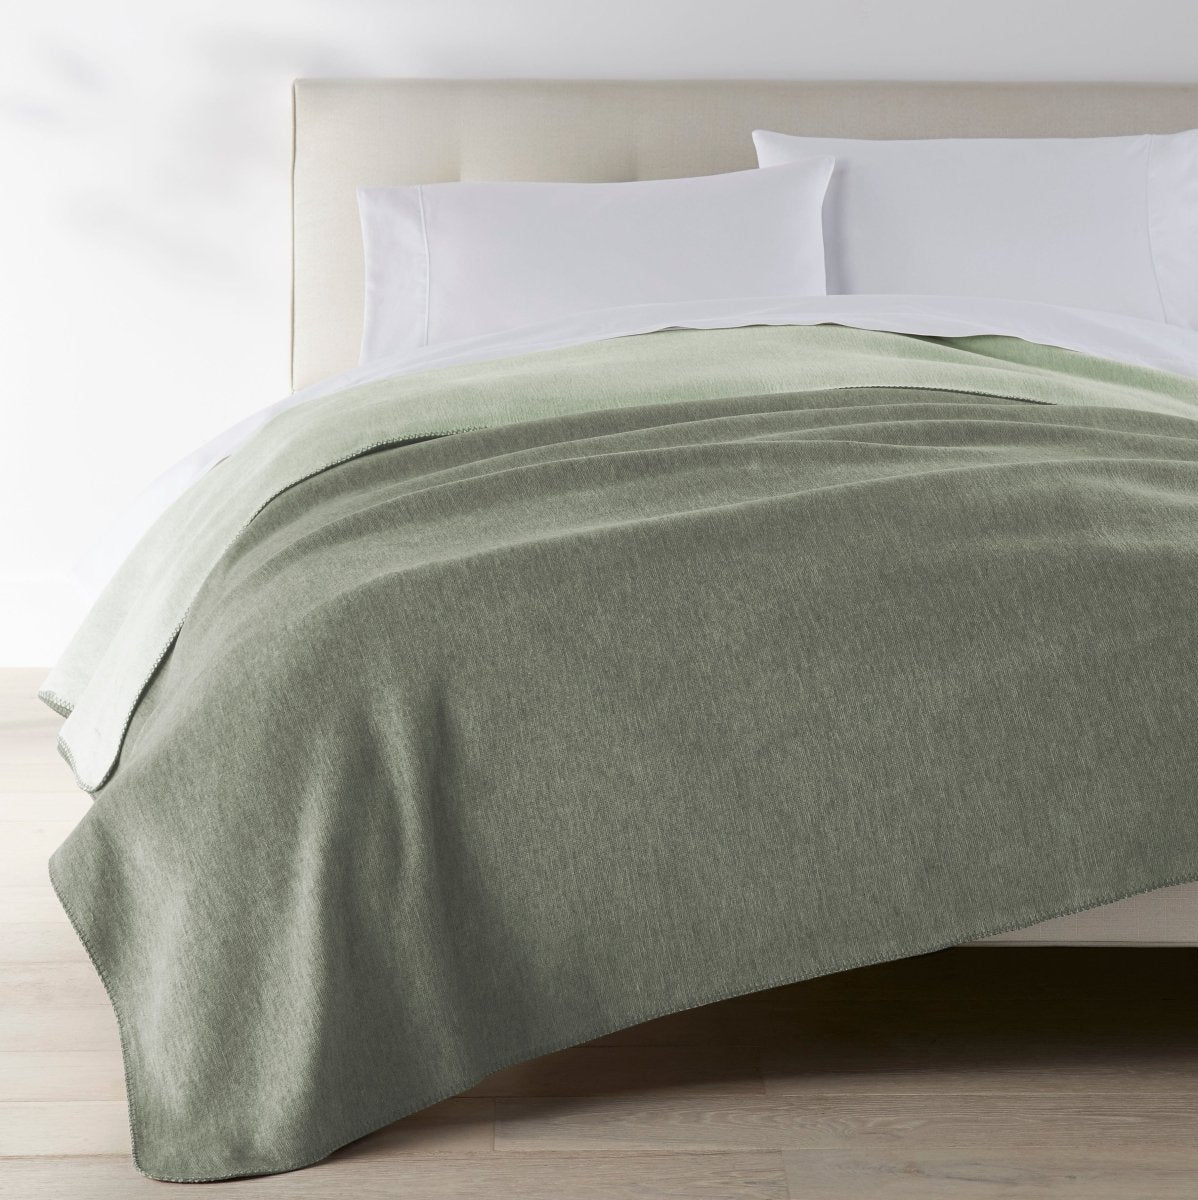 Alta Blanket in Basil shown on Bed | Peacock Alley Blankets at Fig Linens and Home